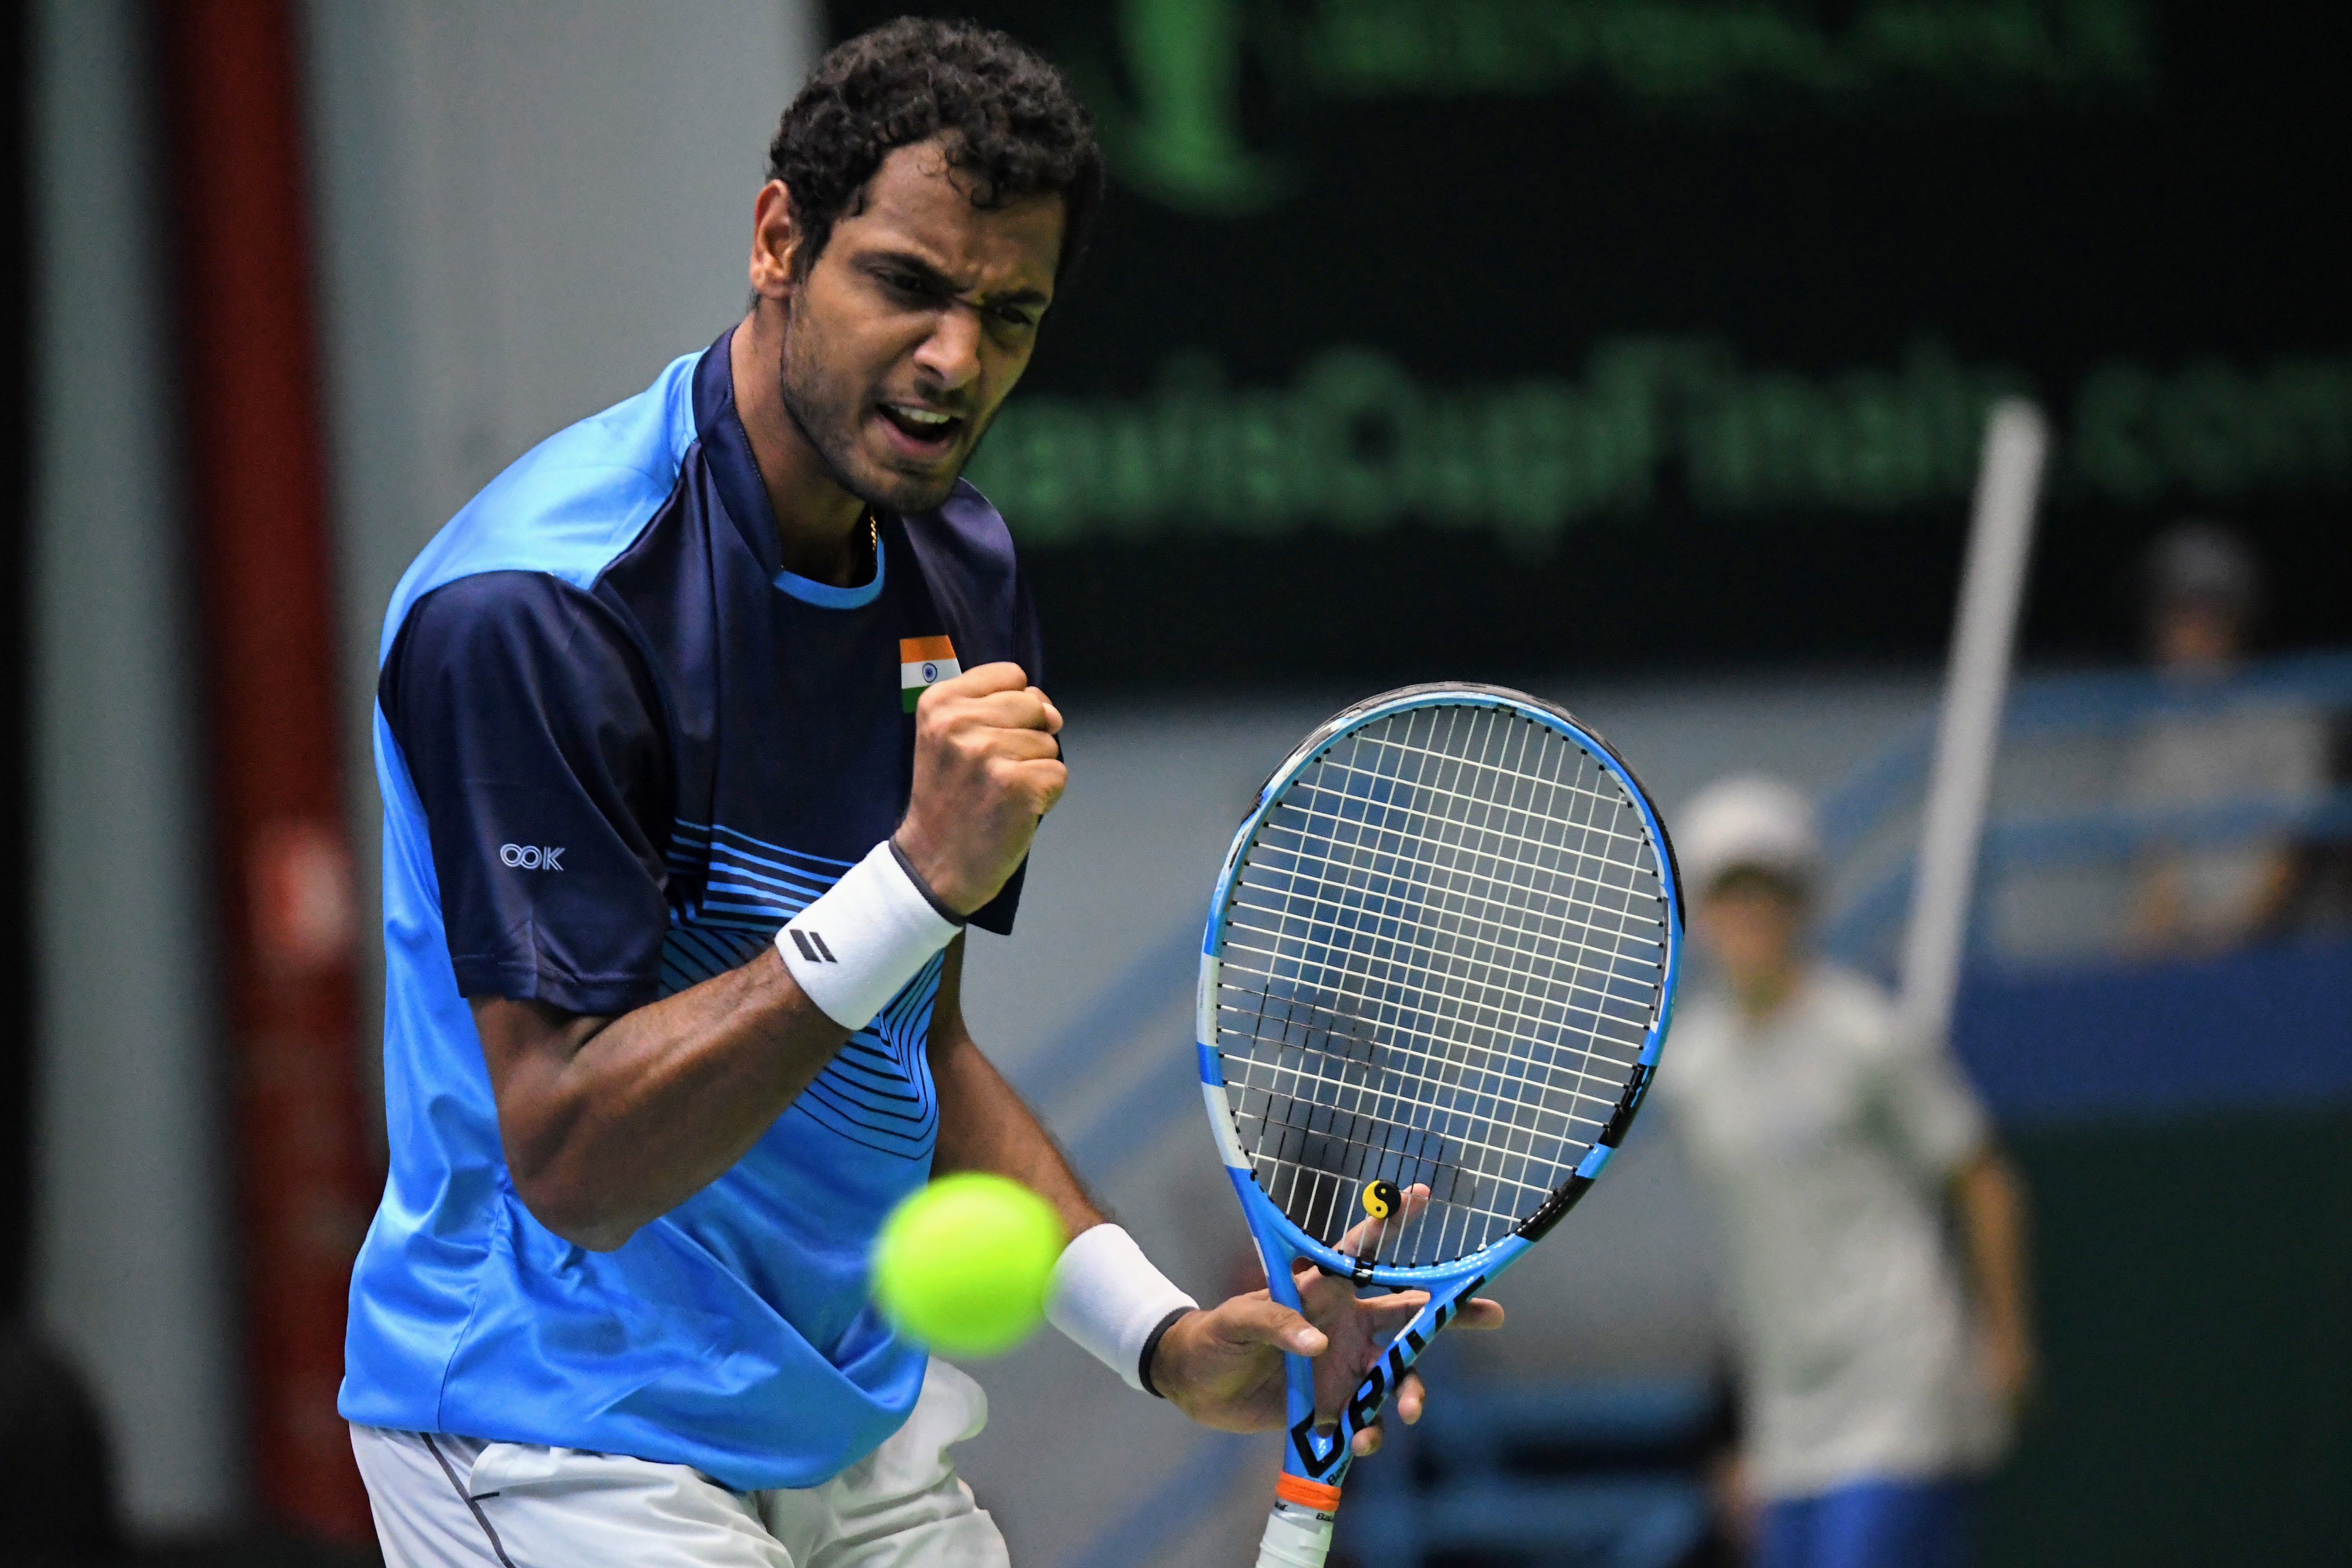 “The main goal was to compete for every point. I tried my best” – Ramkumar, after running former US Open champ Marin Cilic close